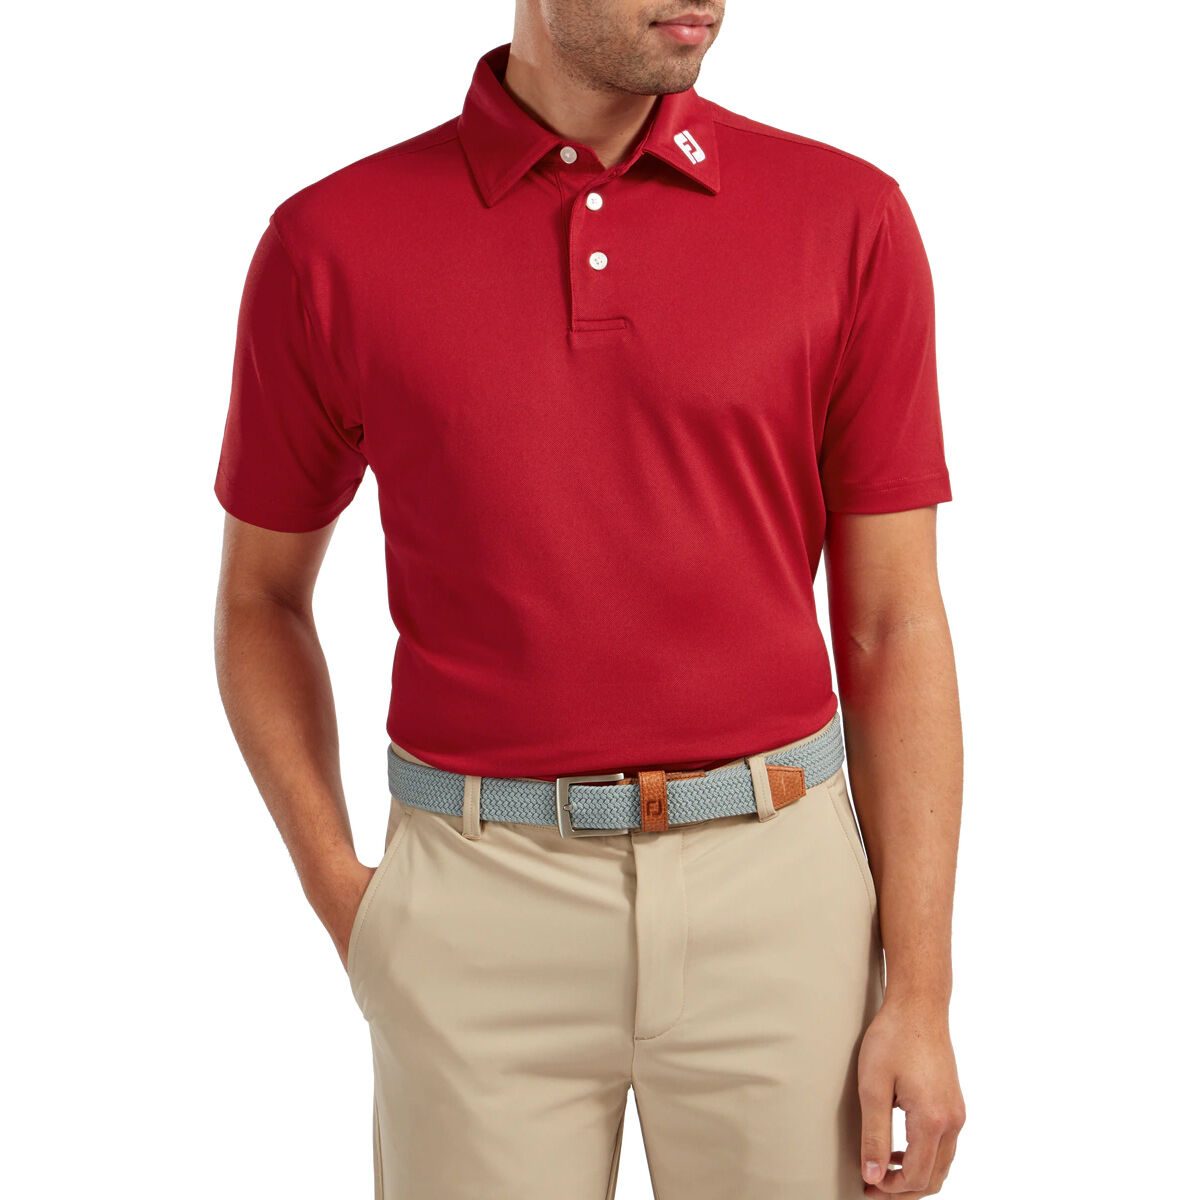 FootJoy Men’s Stretch Pique Solid Colour Golf Polo Shirt, Mens, Red, Large | American Golf